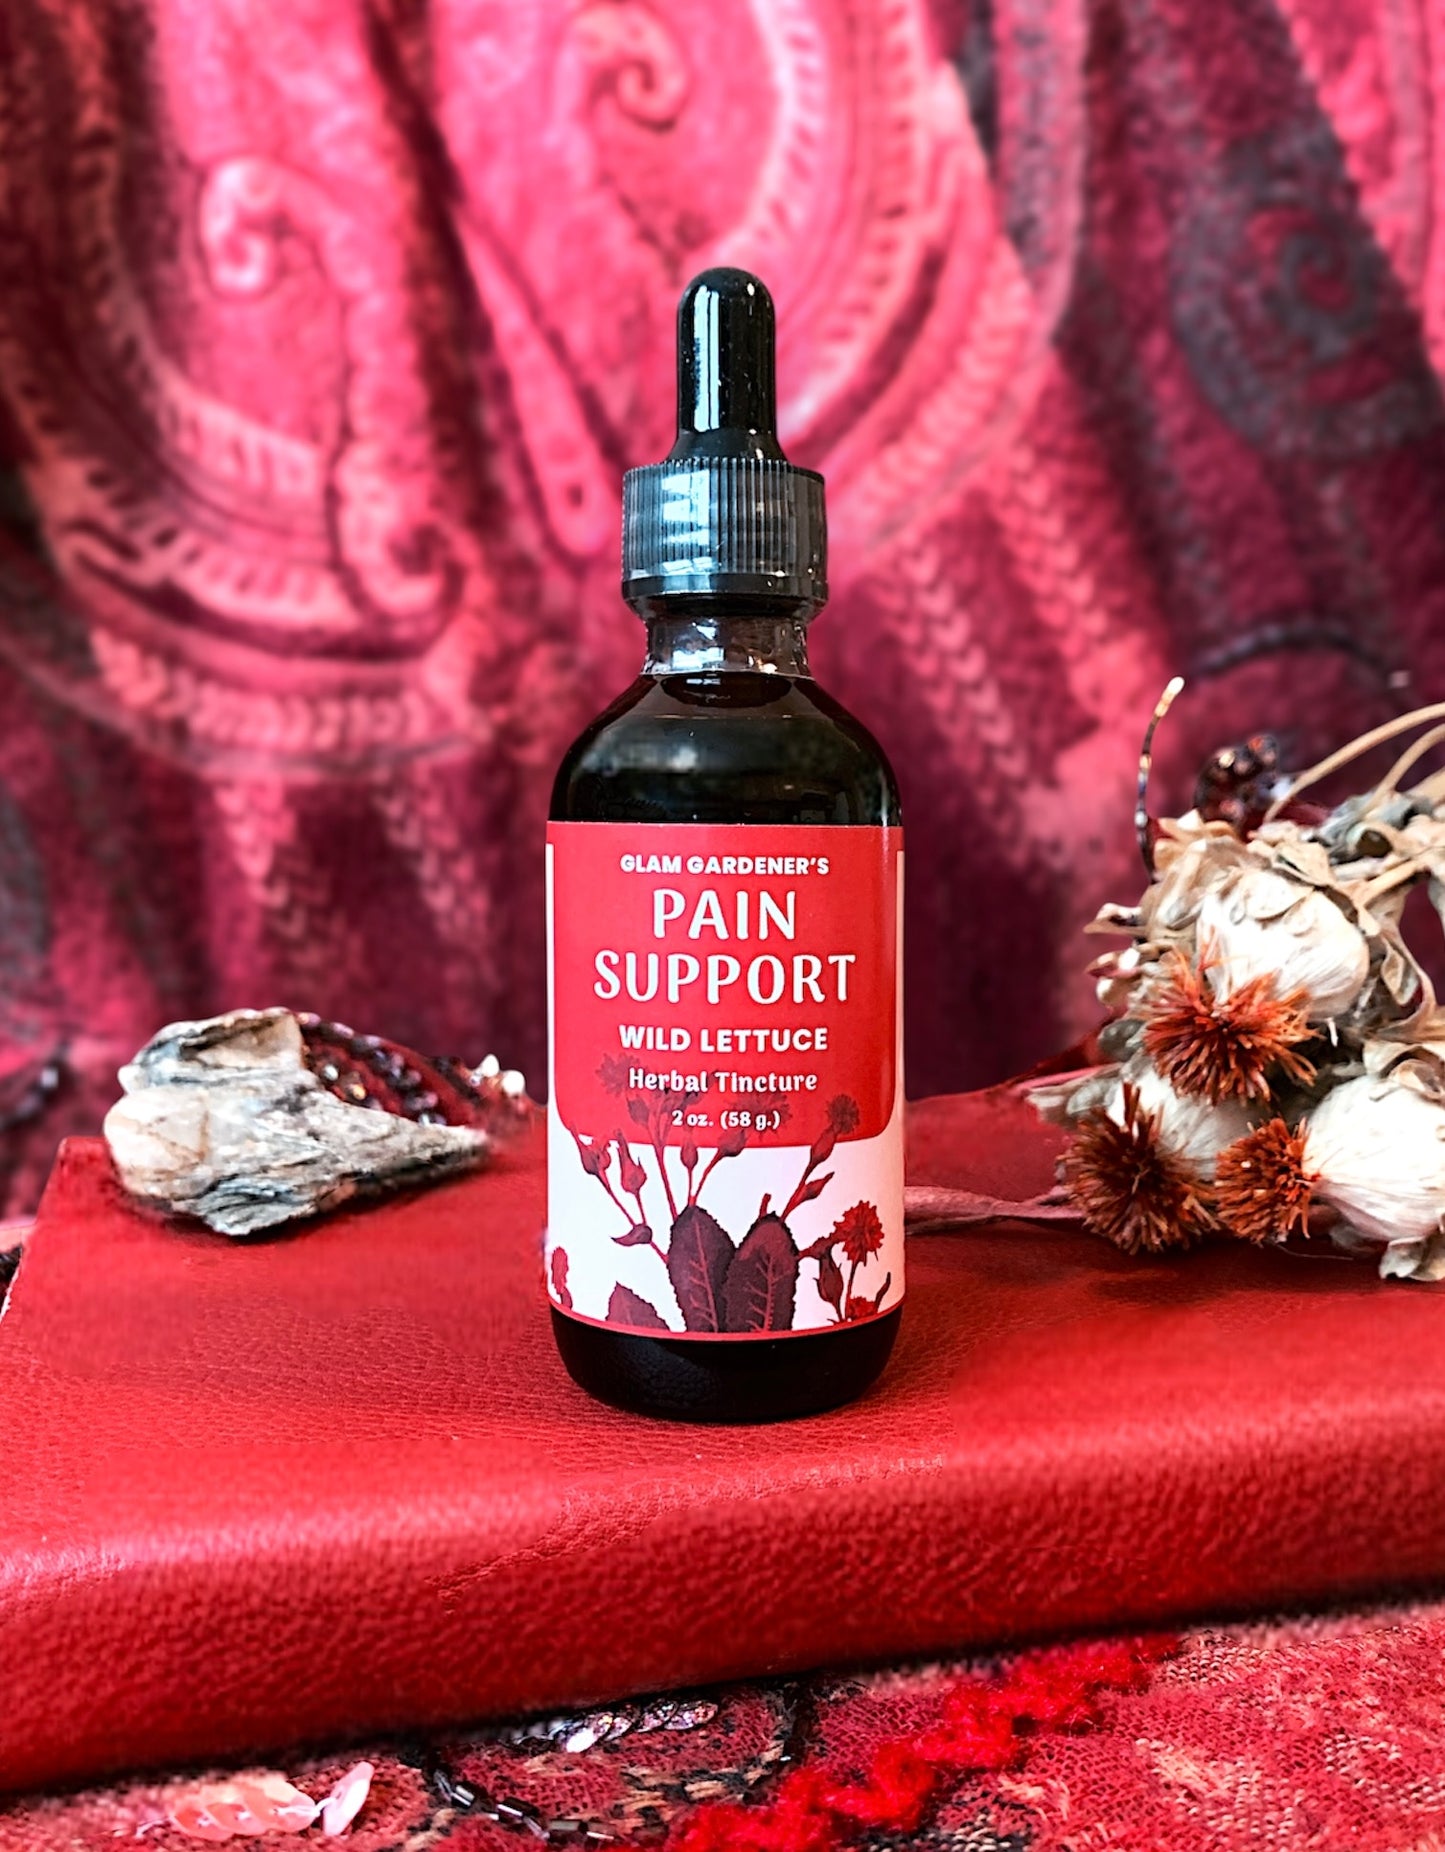 Pain Support: Wild Lettuce Herbal Tincture